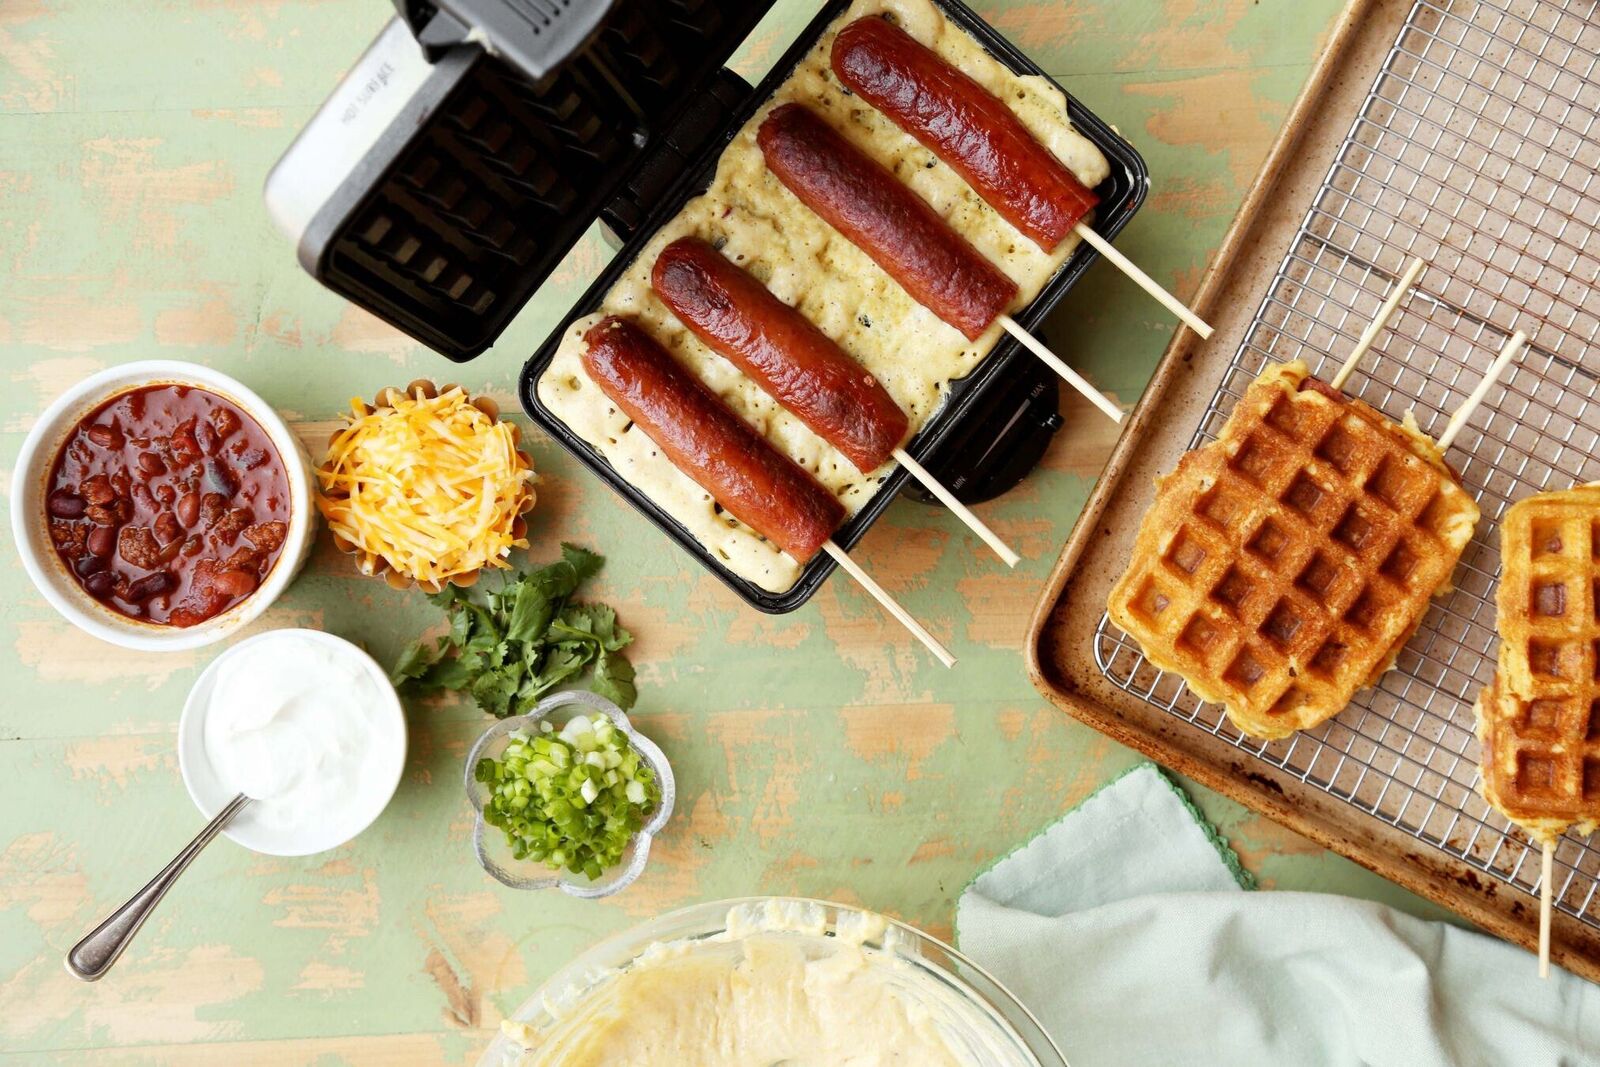 How To Make Corn Dogs On Waffle Iron